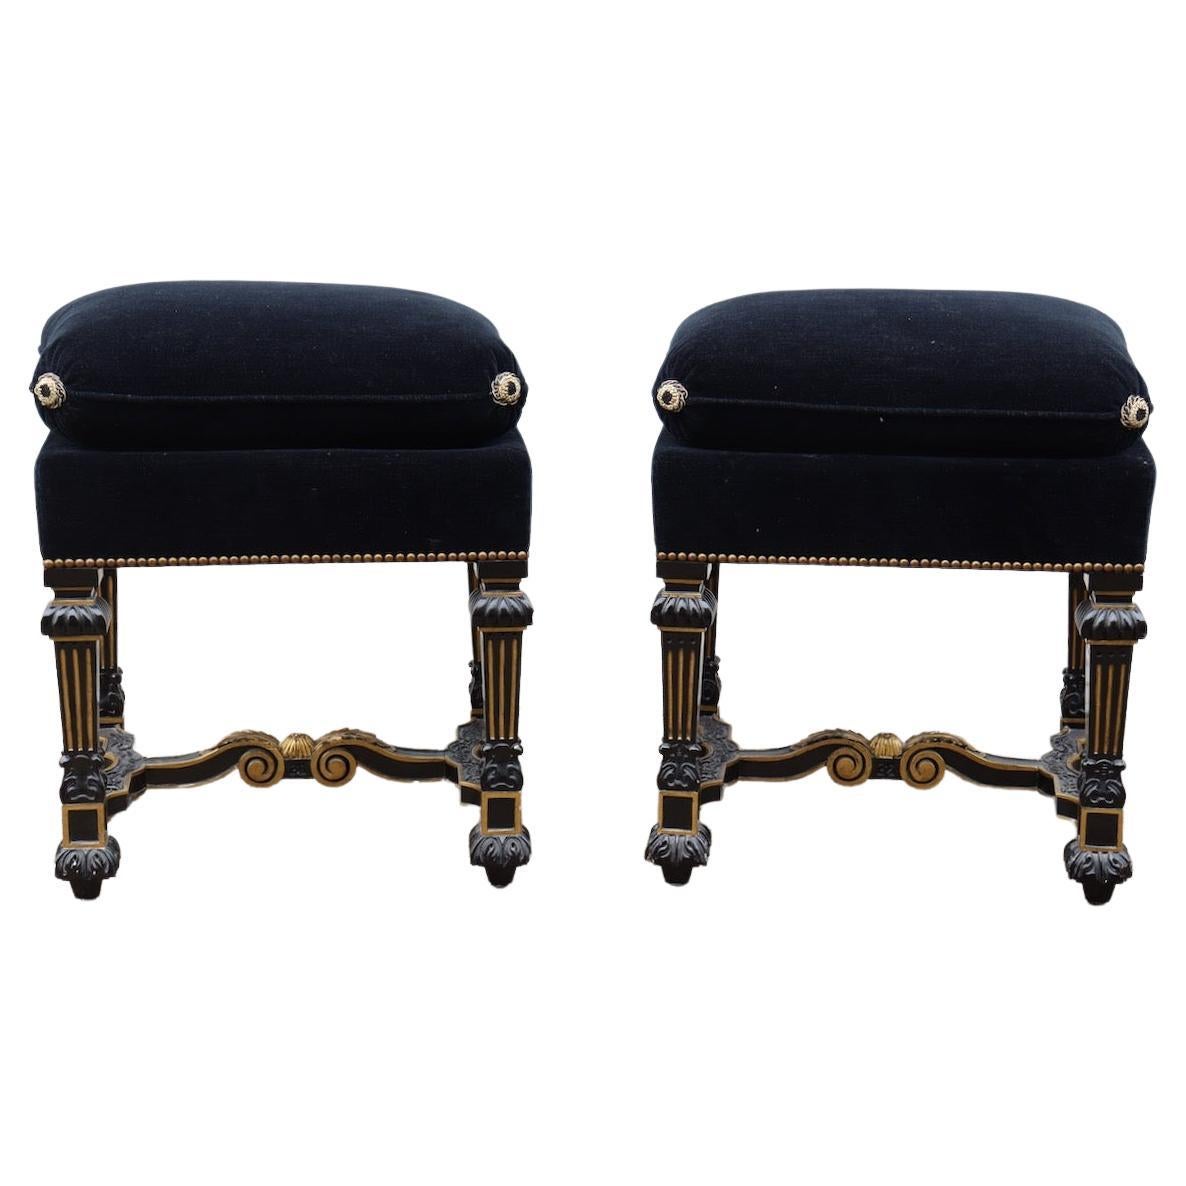 Pair of 20th century Louis XIV style Vintage benches.
Black lacquered beech wood and gilding enhanced.
Four sheaths feet carved with flowers and gadroons joined by an entretoise in H.
With its black velvet fabric cushions in perfect